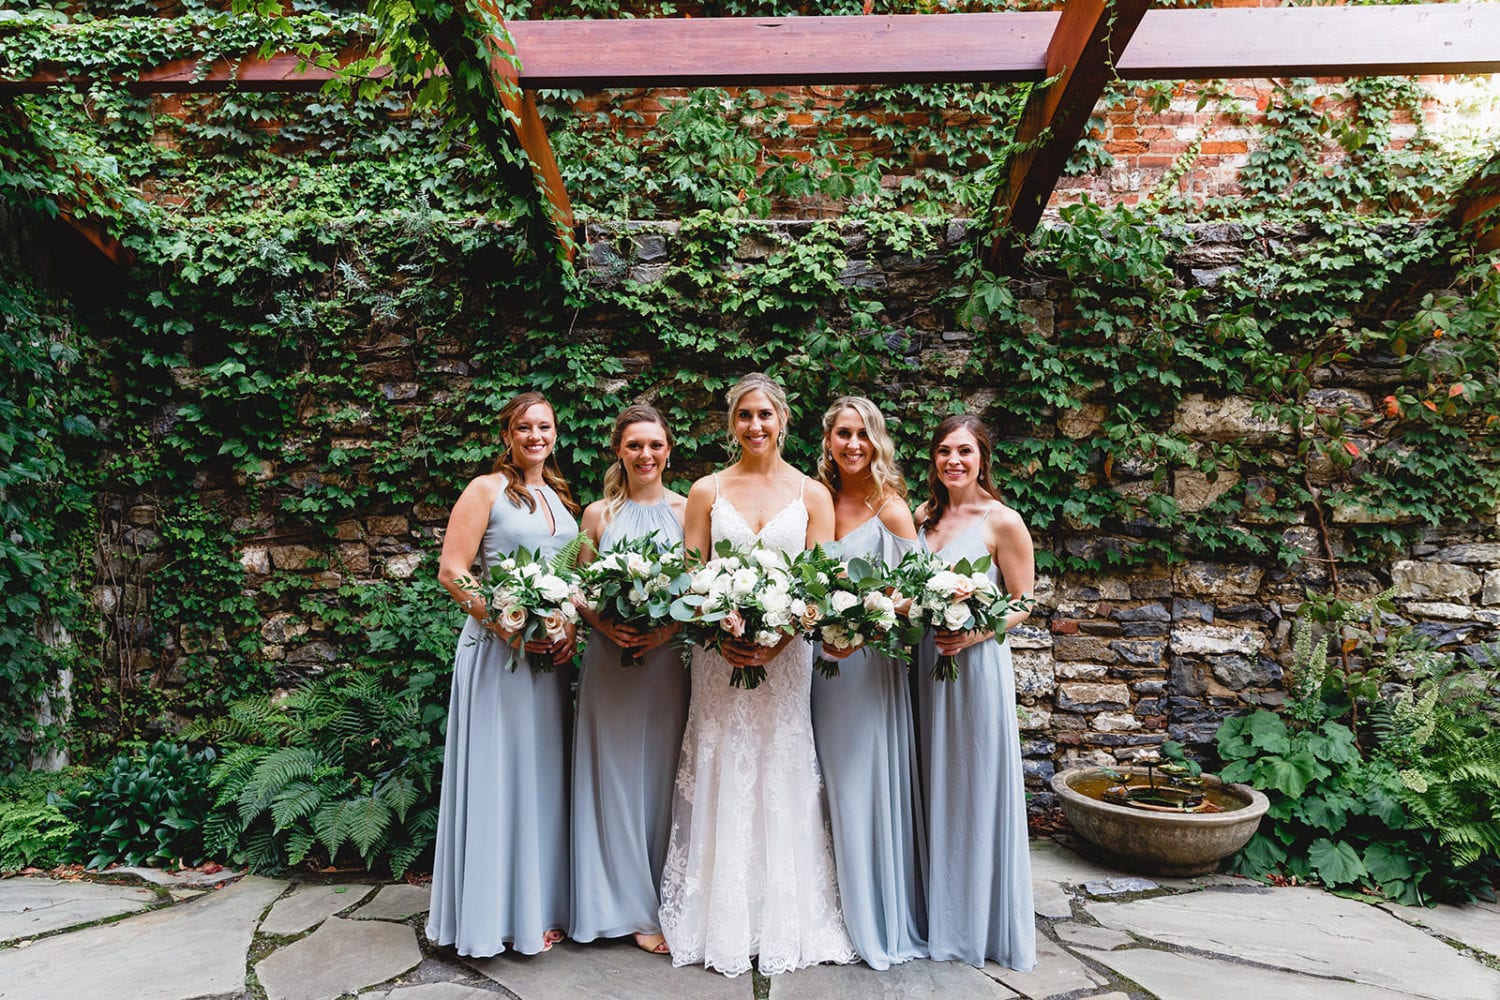 Pictures of the bridal party at the Excelsior wedding venue